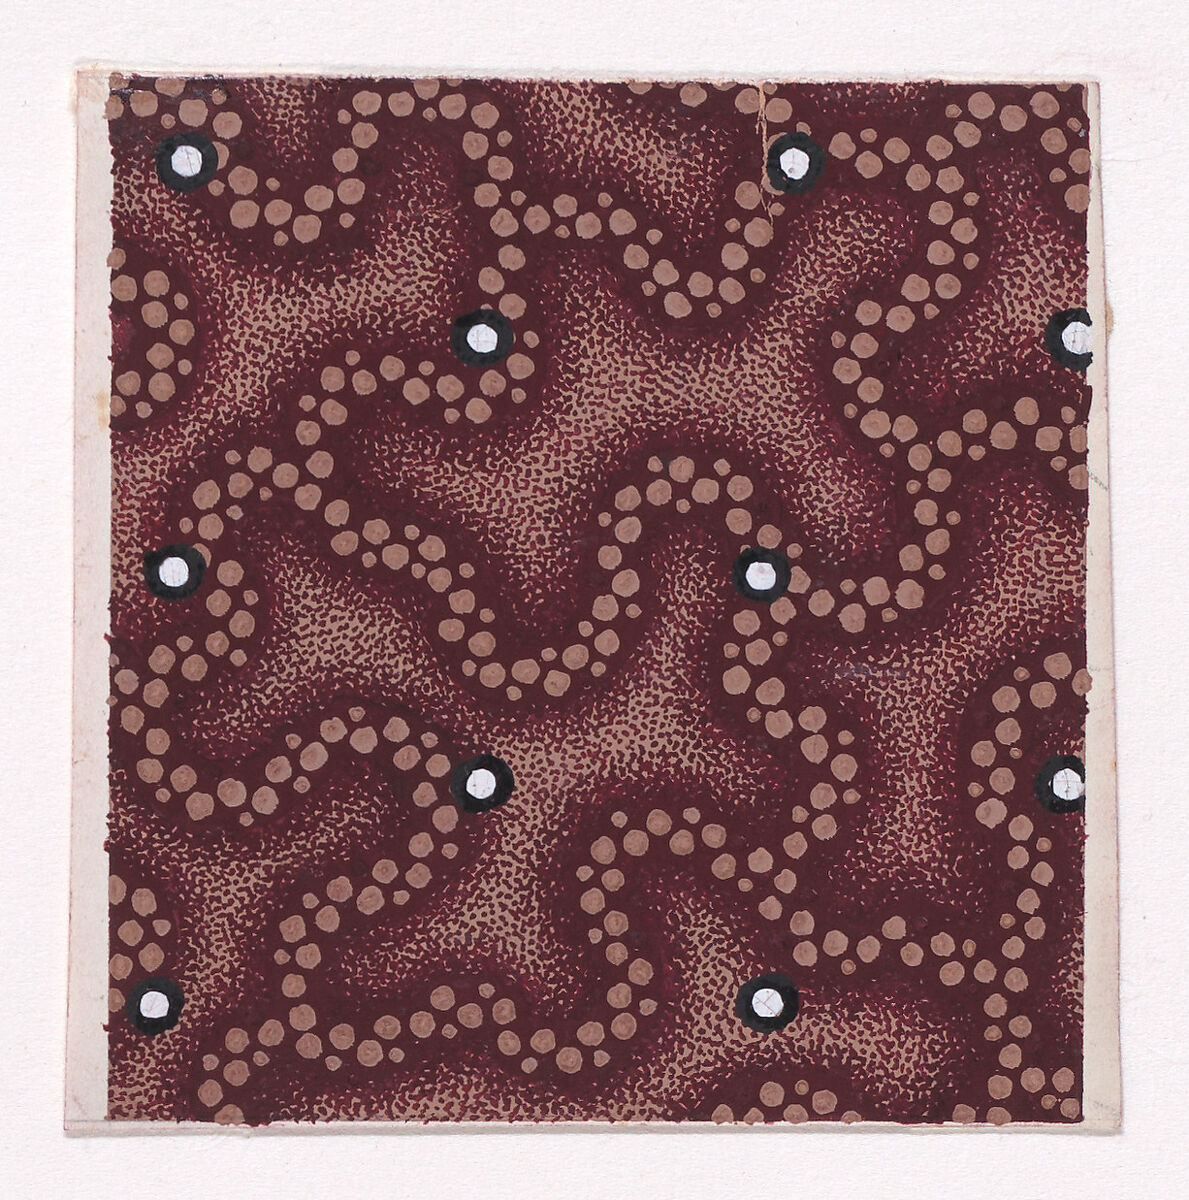 Textile Design with Alternating Vertical and Horizontal Rows of Pearls Over a Vermicular Pattern Formed with Dotted Lines, Anonymous, Alsatian, 19th century, Gouache 